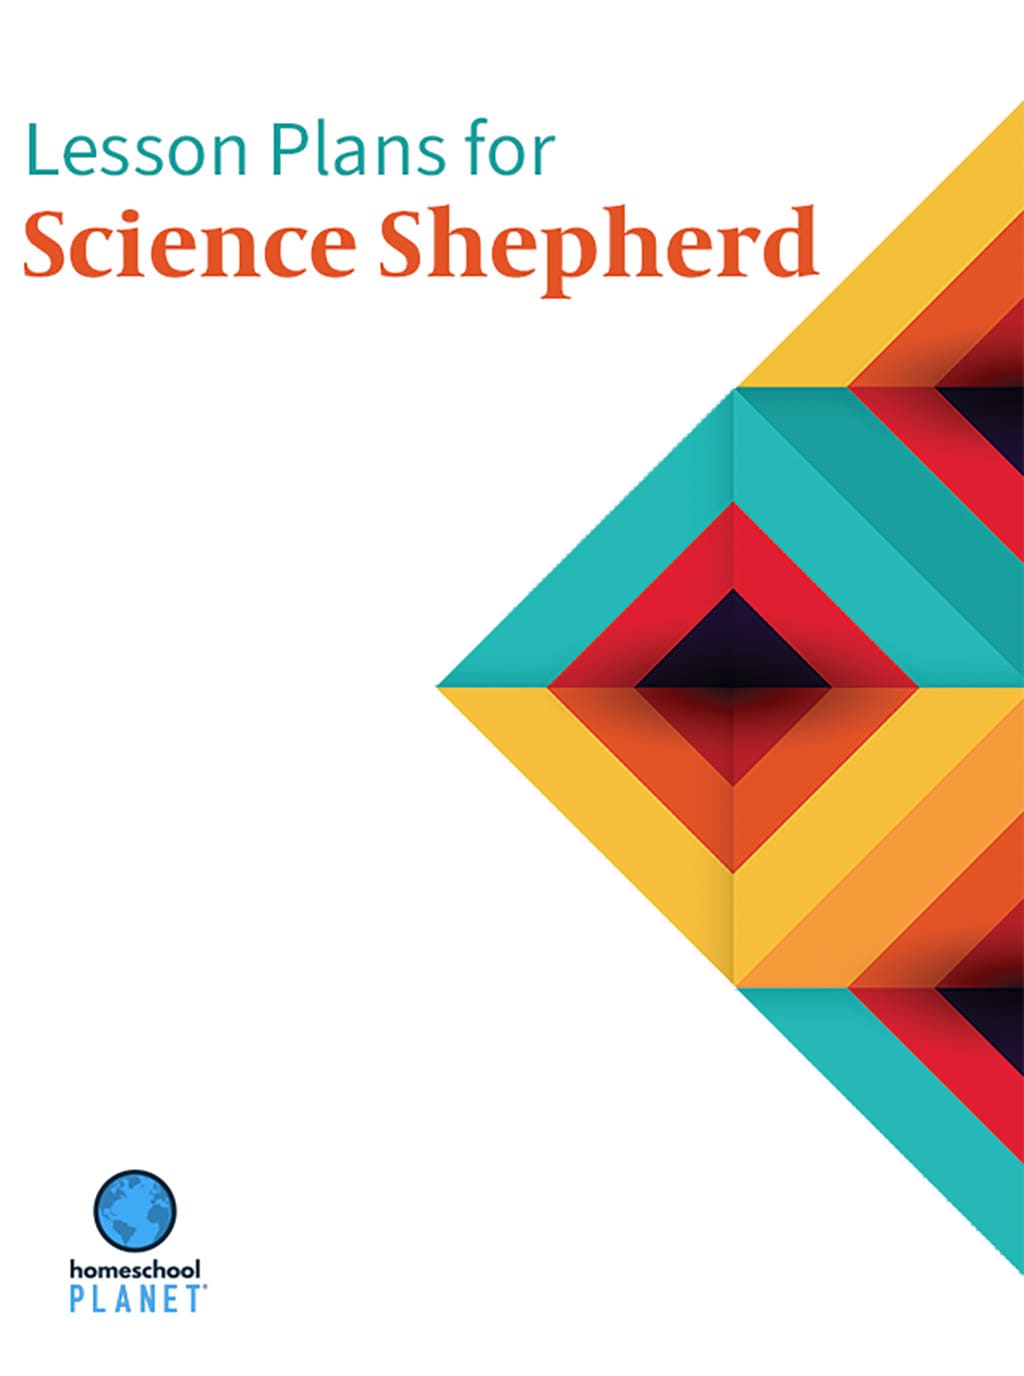 Home school lesson plans for Science Shepherd Astronomy cover with Homeschool Planet logo